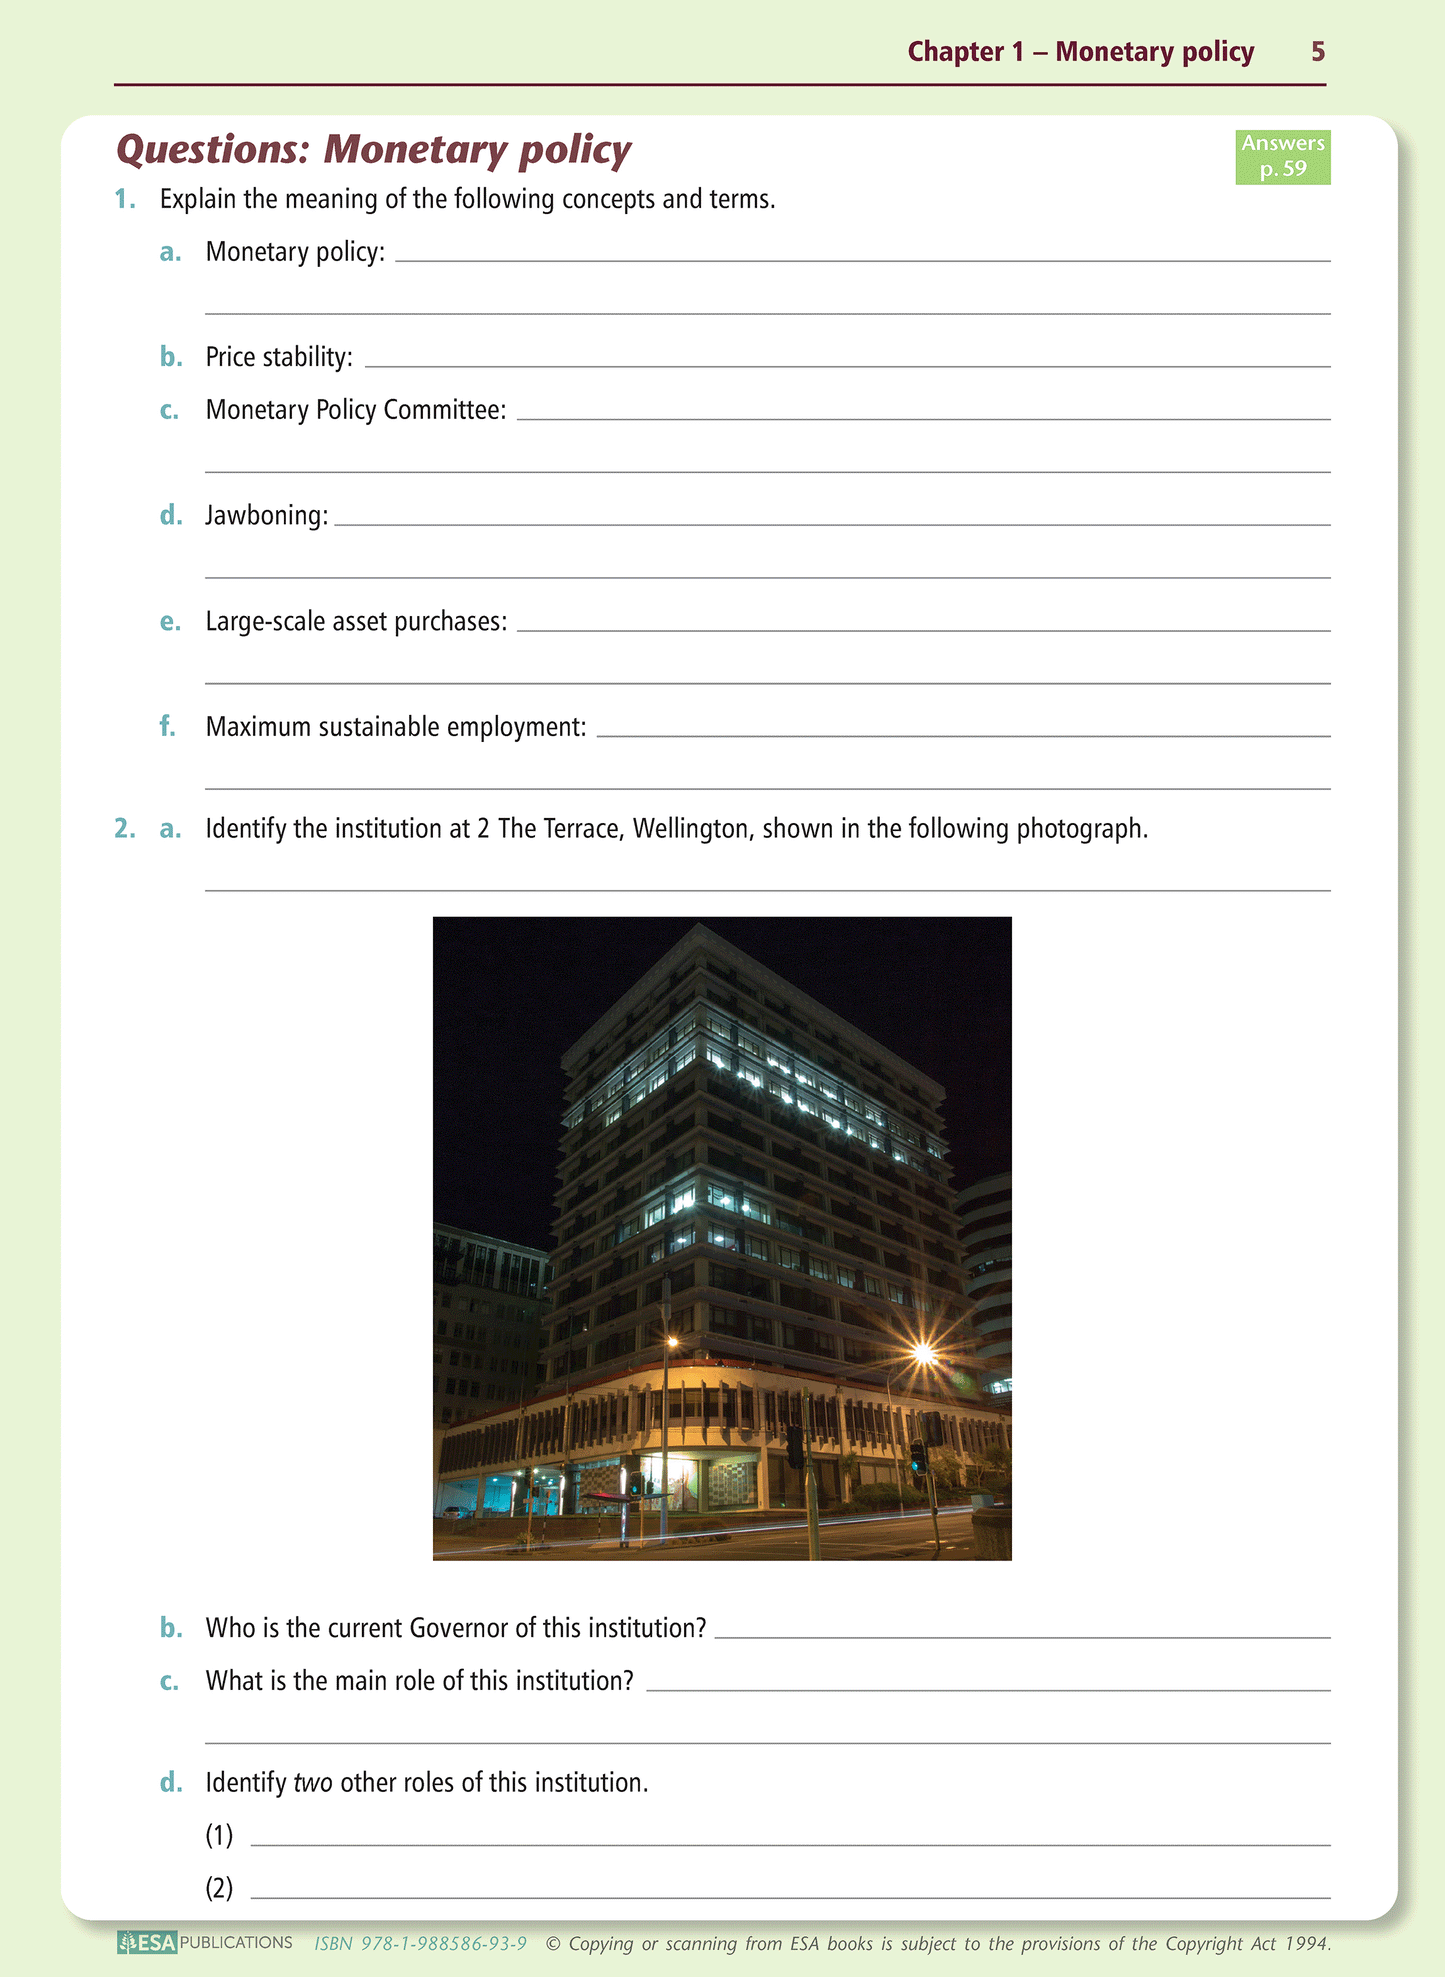 Level 2 Government Policies and Economic Issues 2.6 Learning Workbook